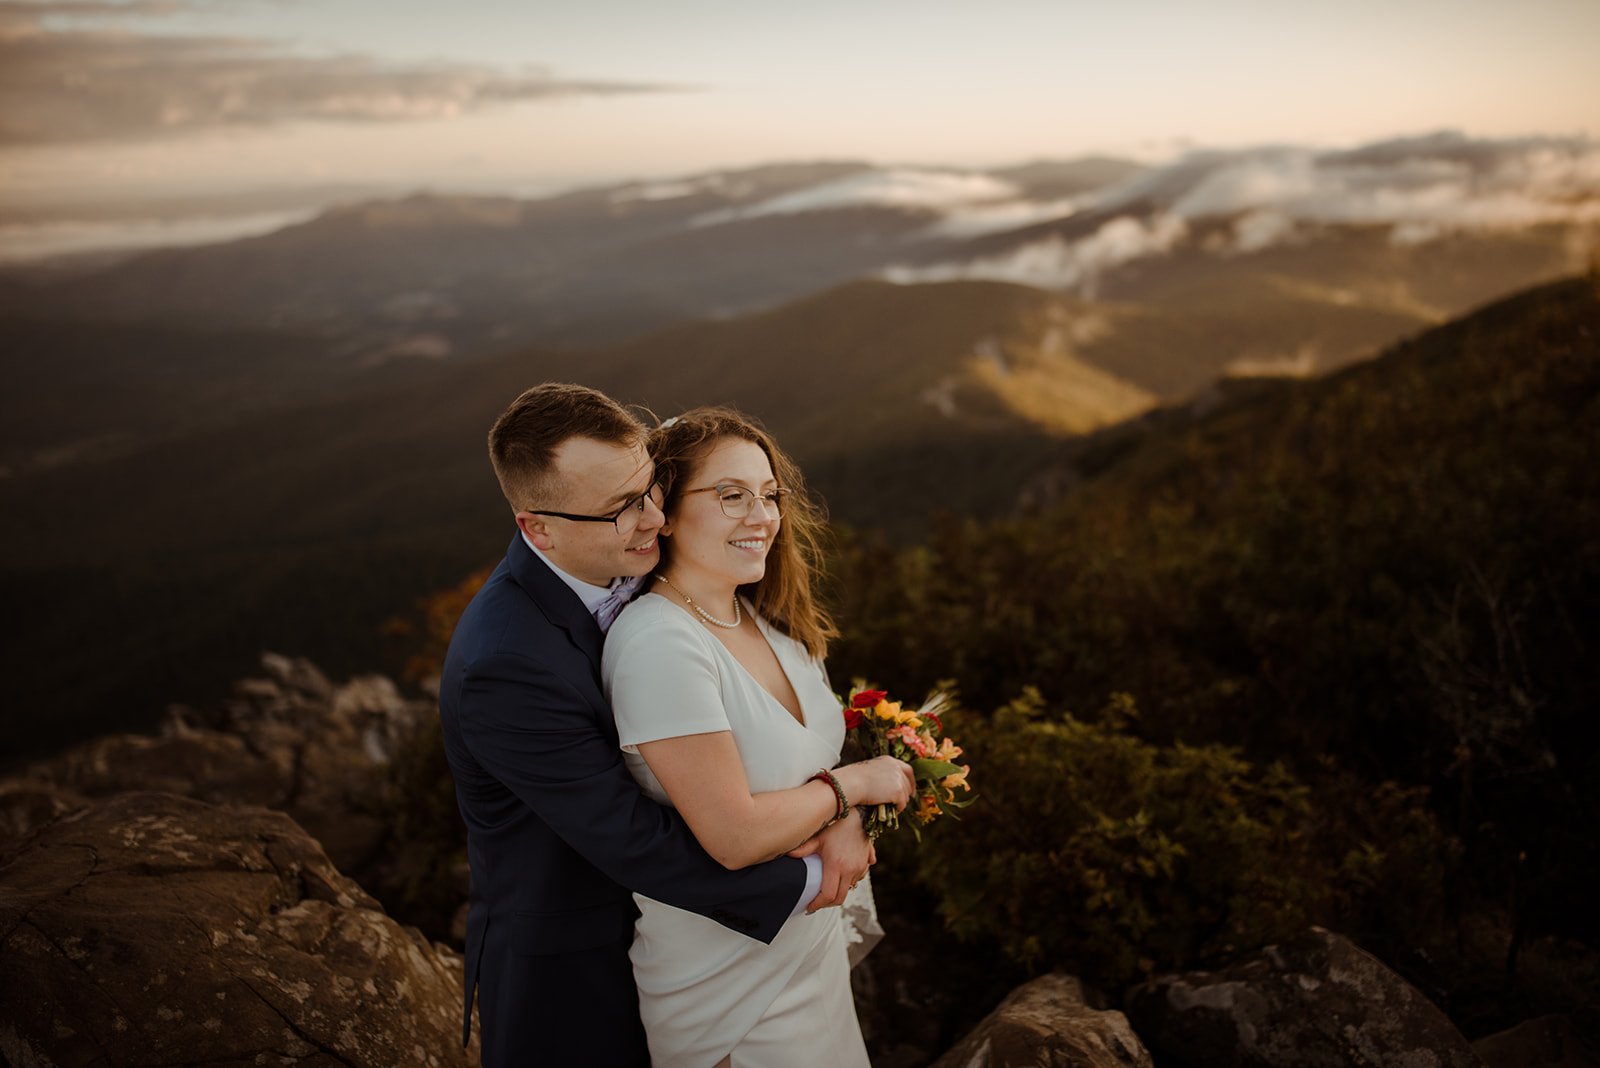 Shenandoah National Park Hiking Elopement with Guests - White Sails Creative_89.jpg